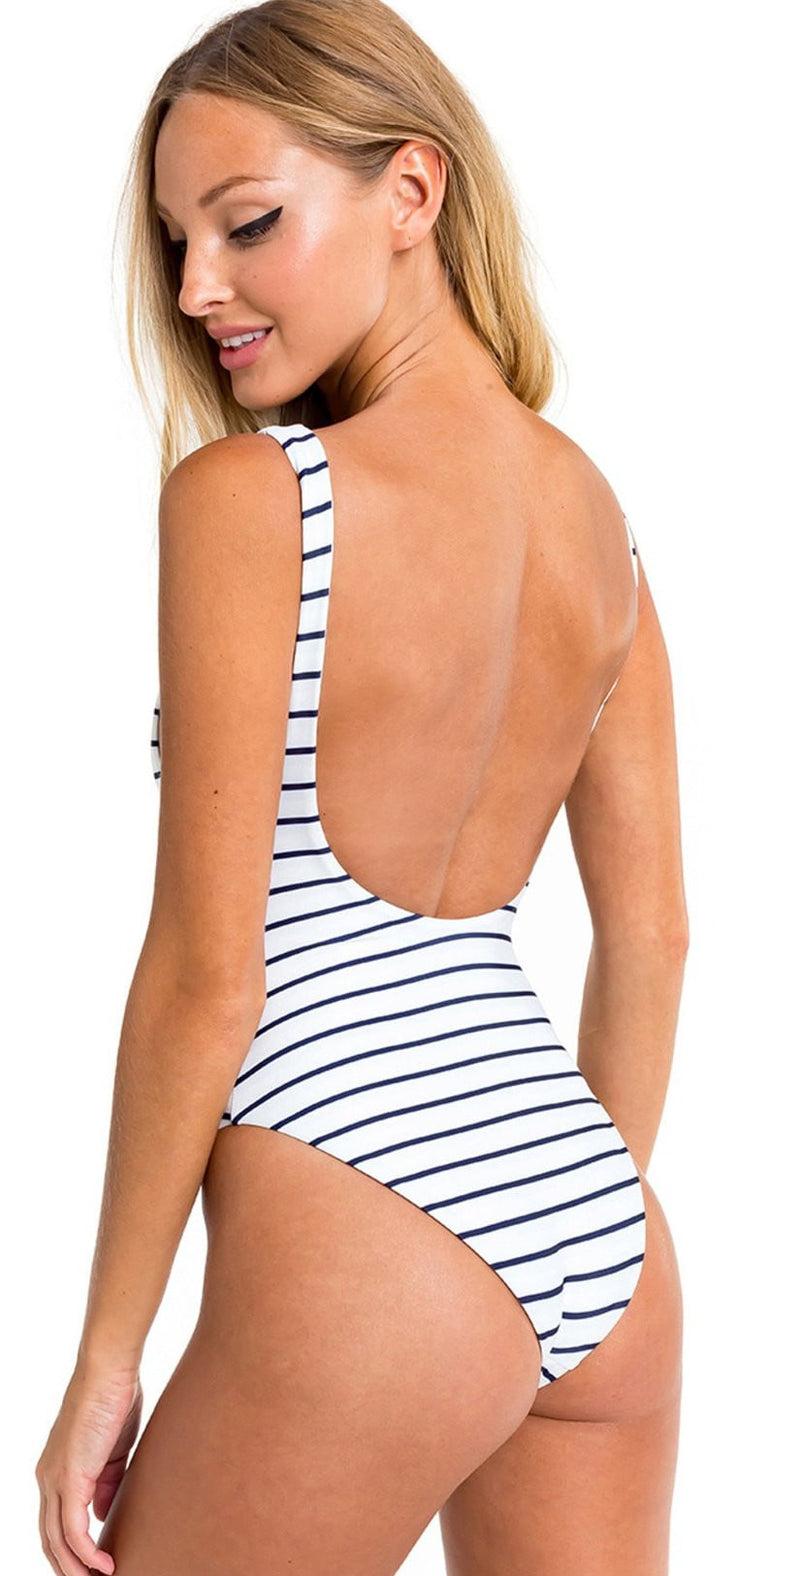 Wildfox Candice "Wild Thing" One Piece Swimsuit: